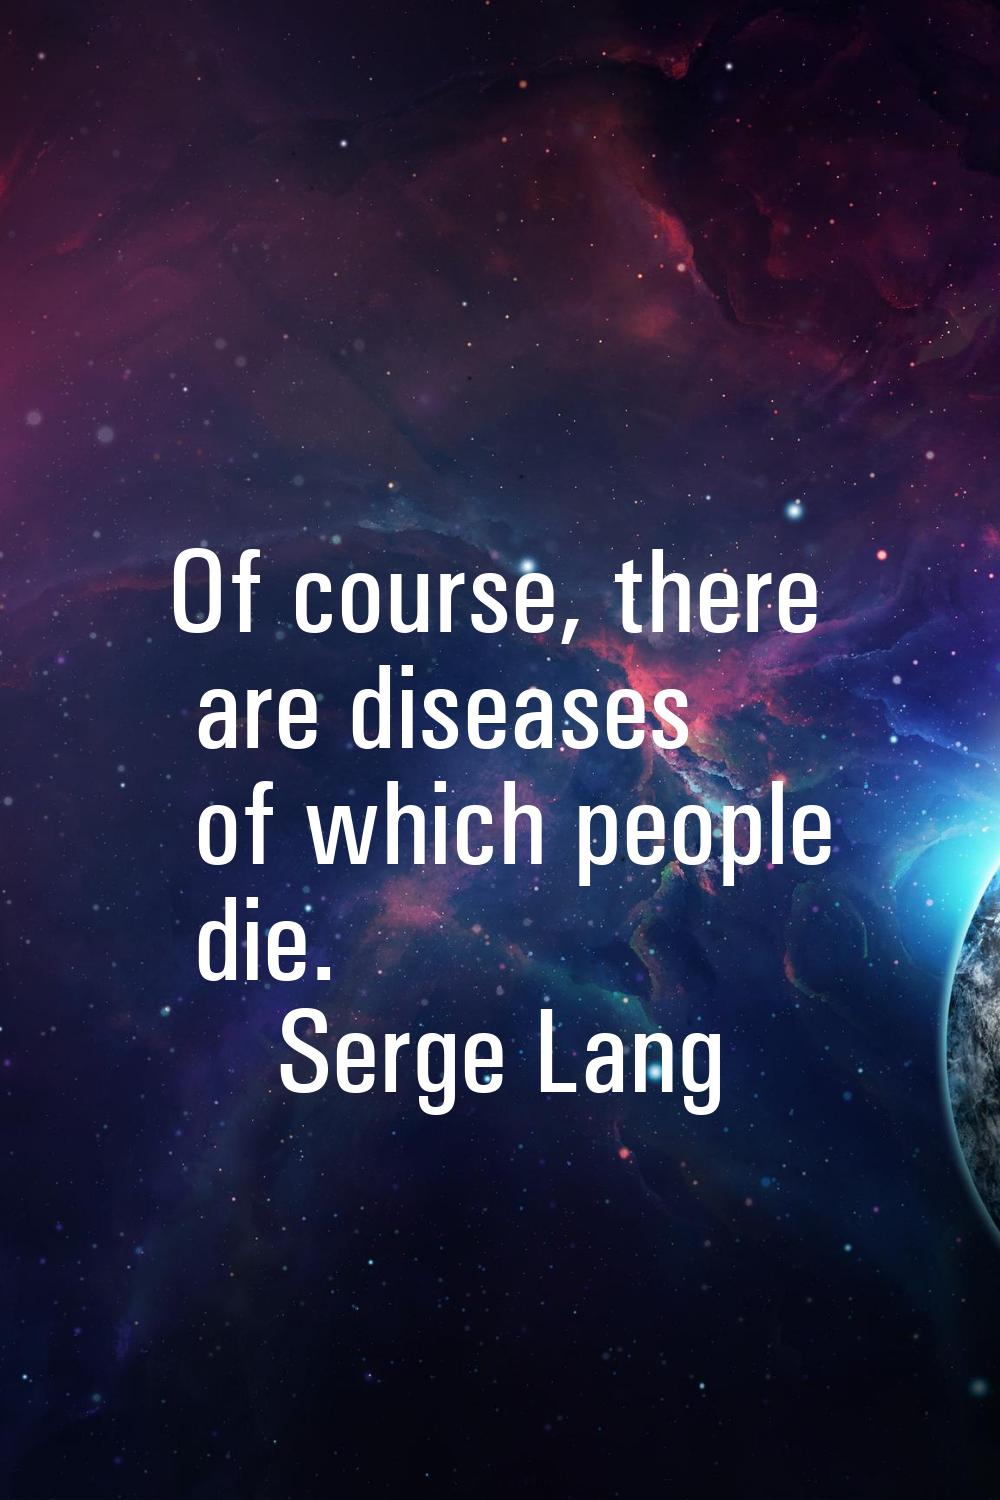 Of course, there are diseases of which people die.